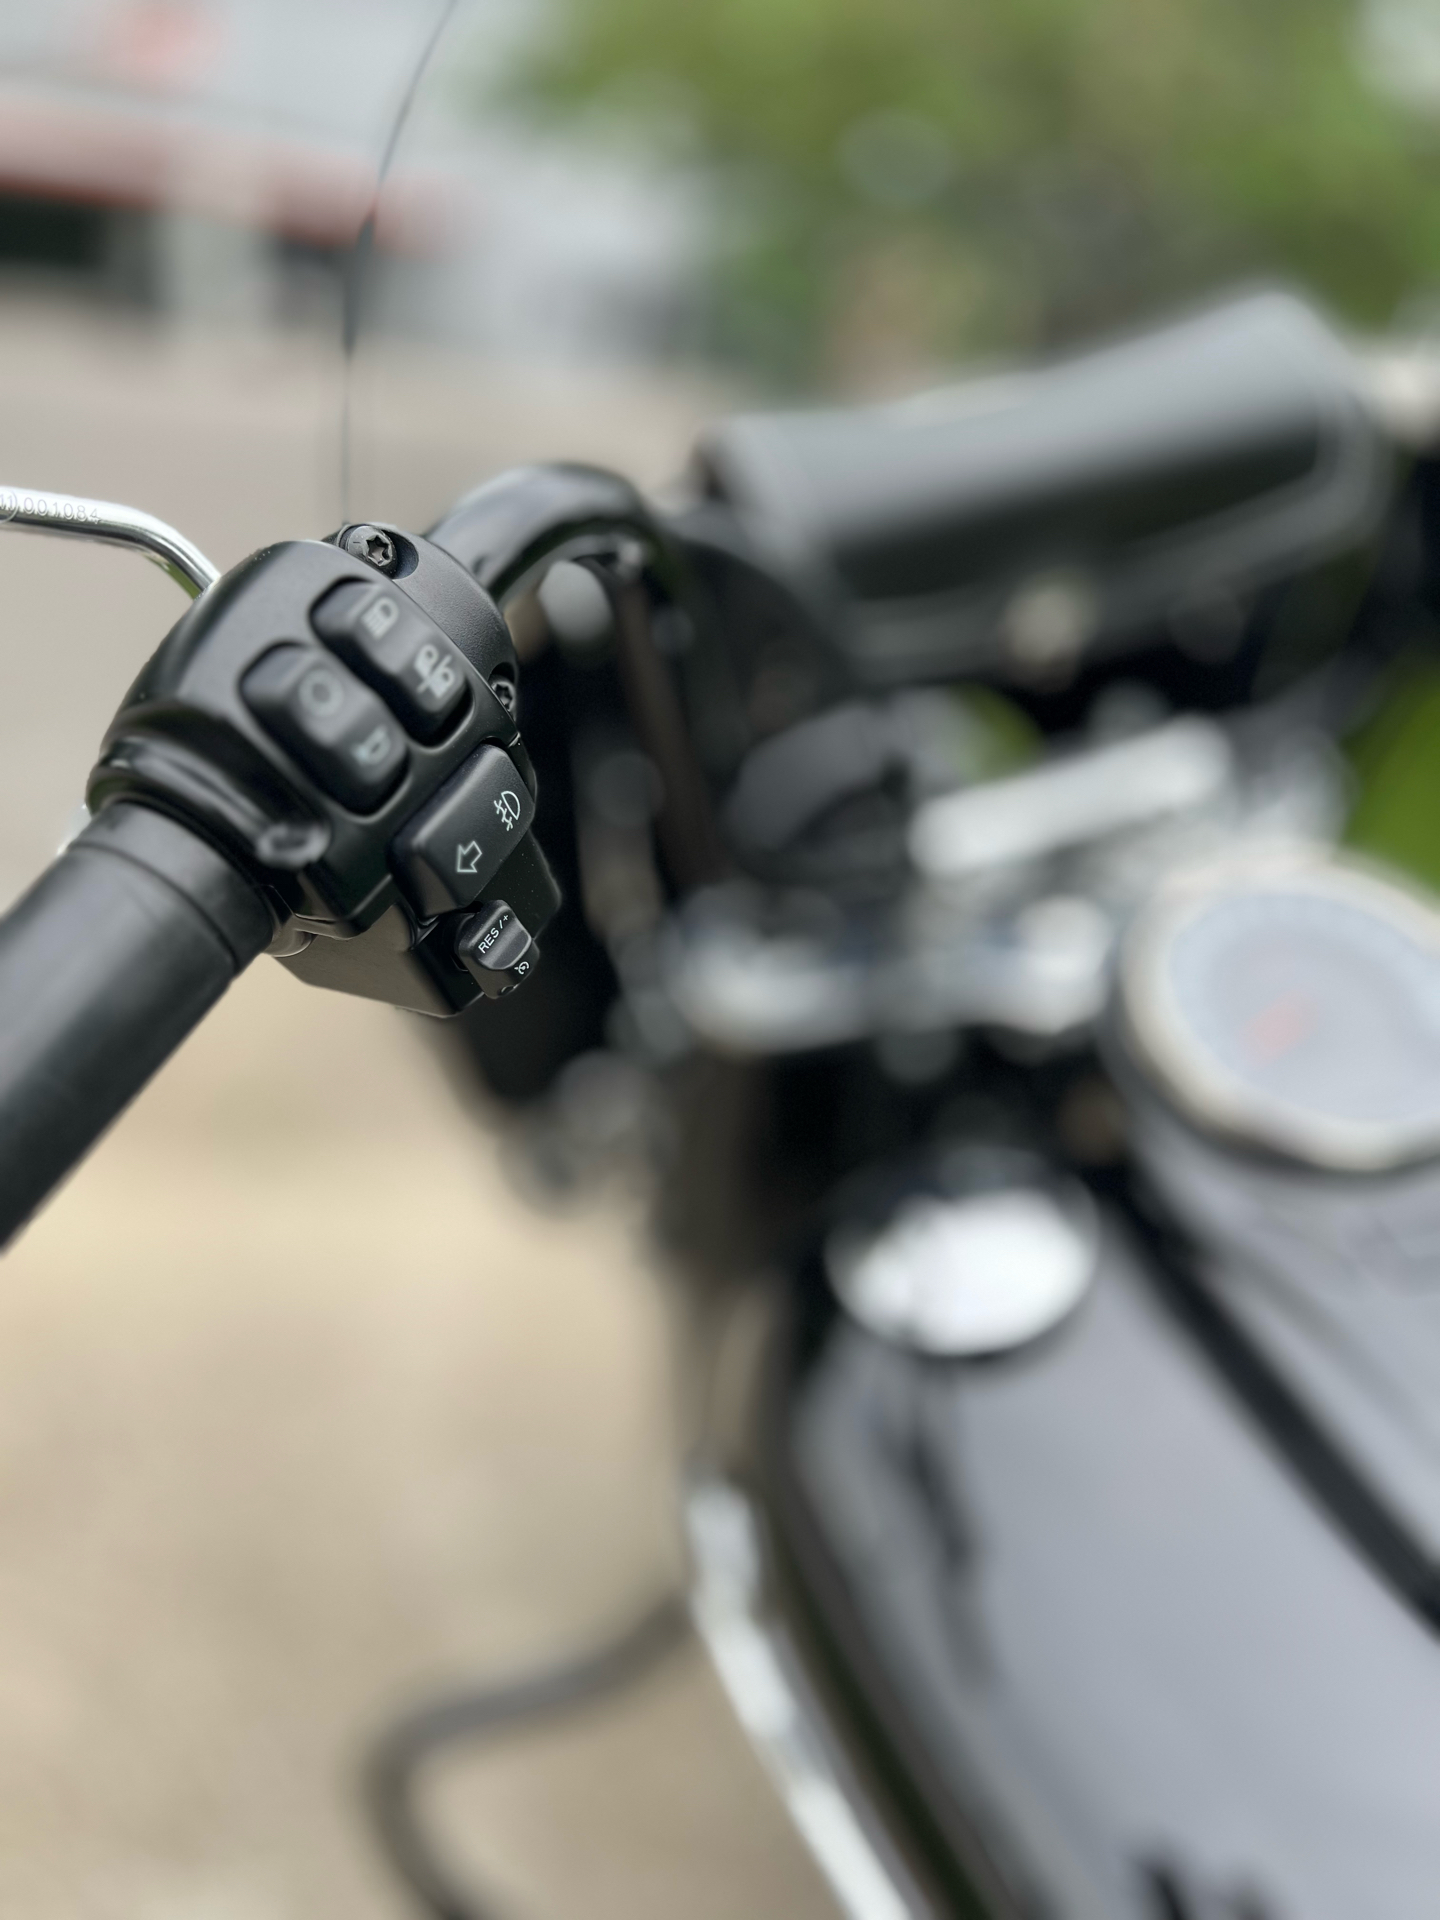 2019 Harley-Davidson Heritage Classic 114 in Franklin, Tennessee - Photo 23